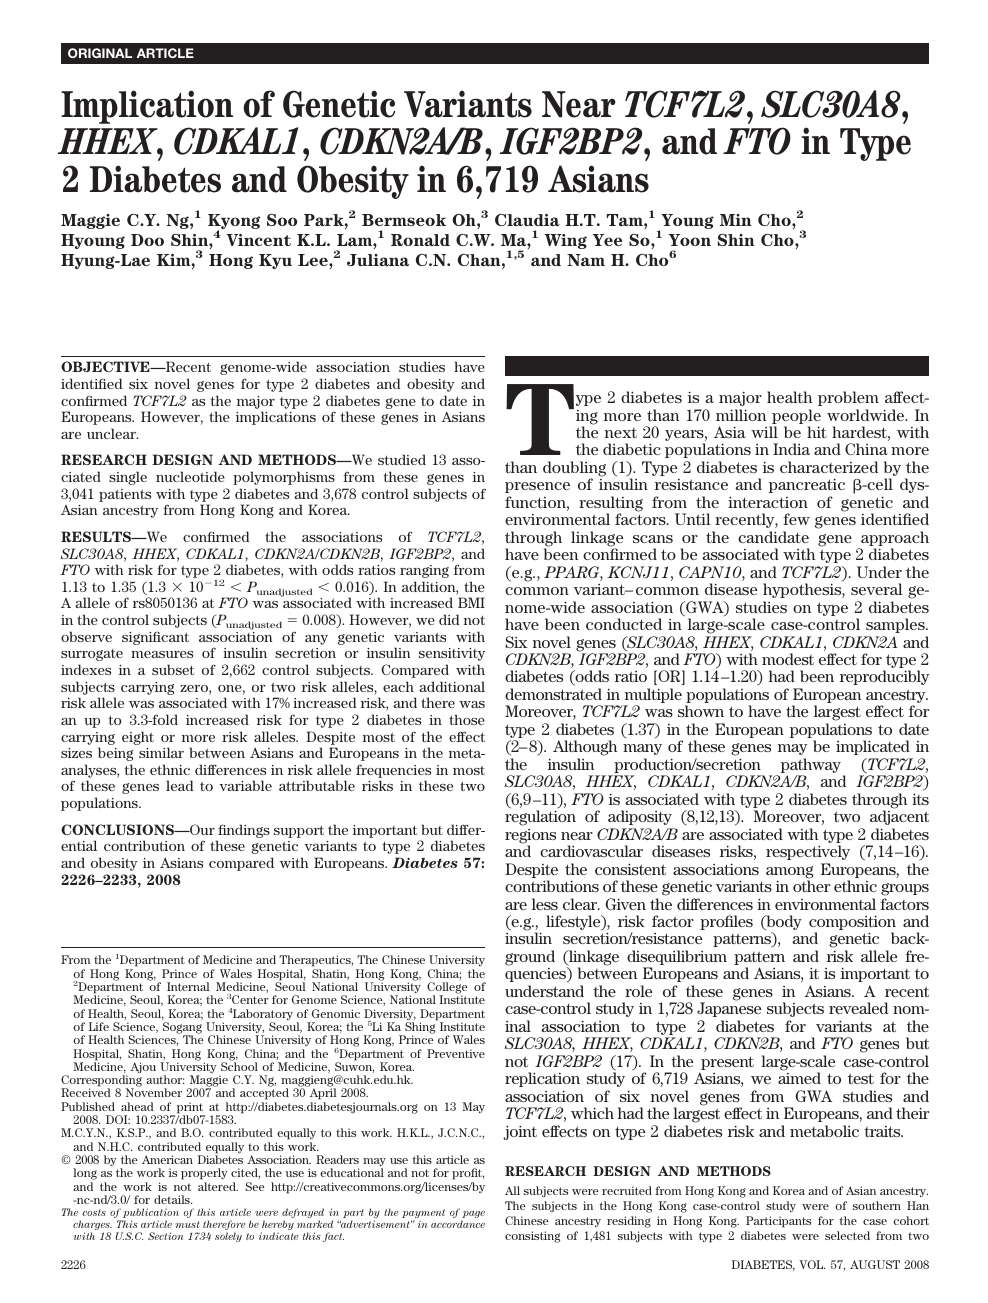 Implication Of Genetic Variants Near Tcf7l2 Slc30a8 Hhex Cdkal1 Cdkn2a B Igf2bp2 And Fto In Type 2 Diabetes And Obesity In 6 719 Asians Topic Of Research Paper In Biological Sciences Download Scholarly